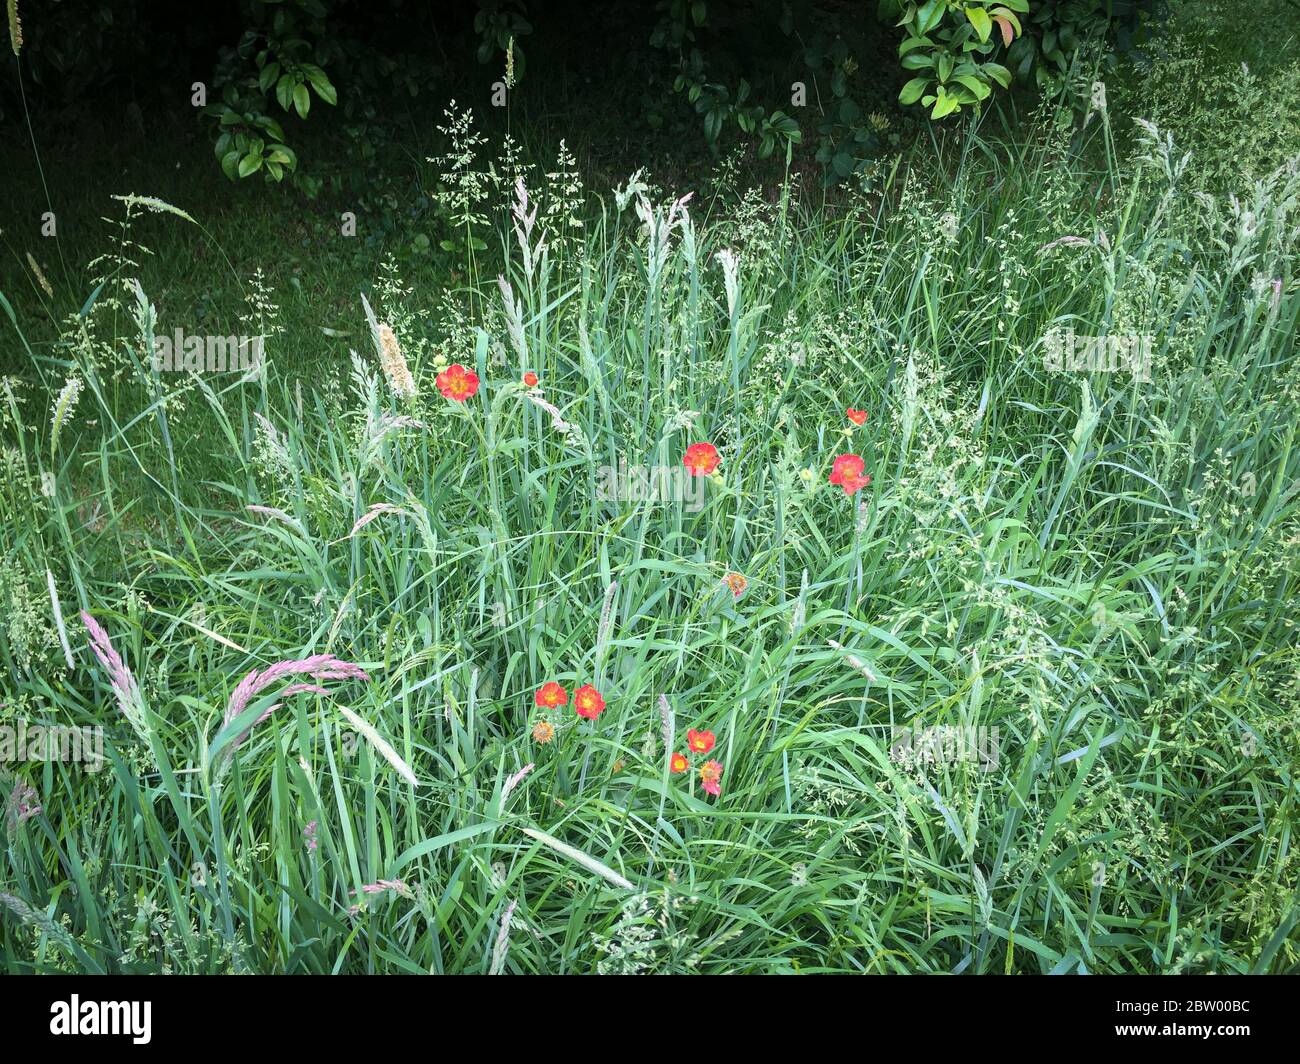 Geum 'Mrs Bradshaw' among mixed grasses in perennial meadow Stock Photo